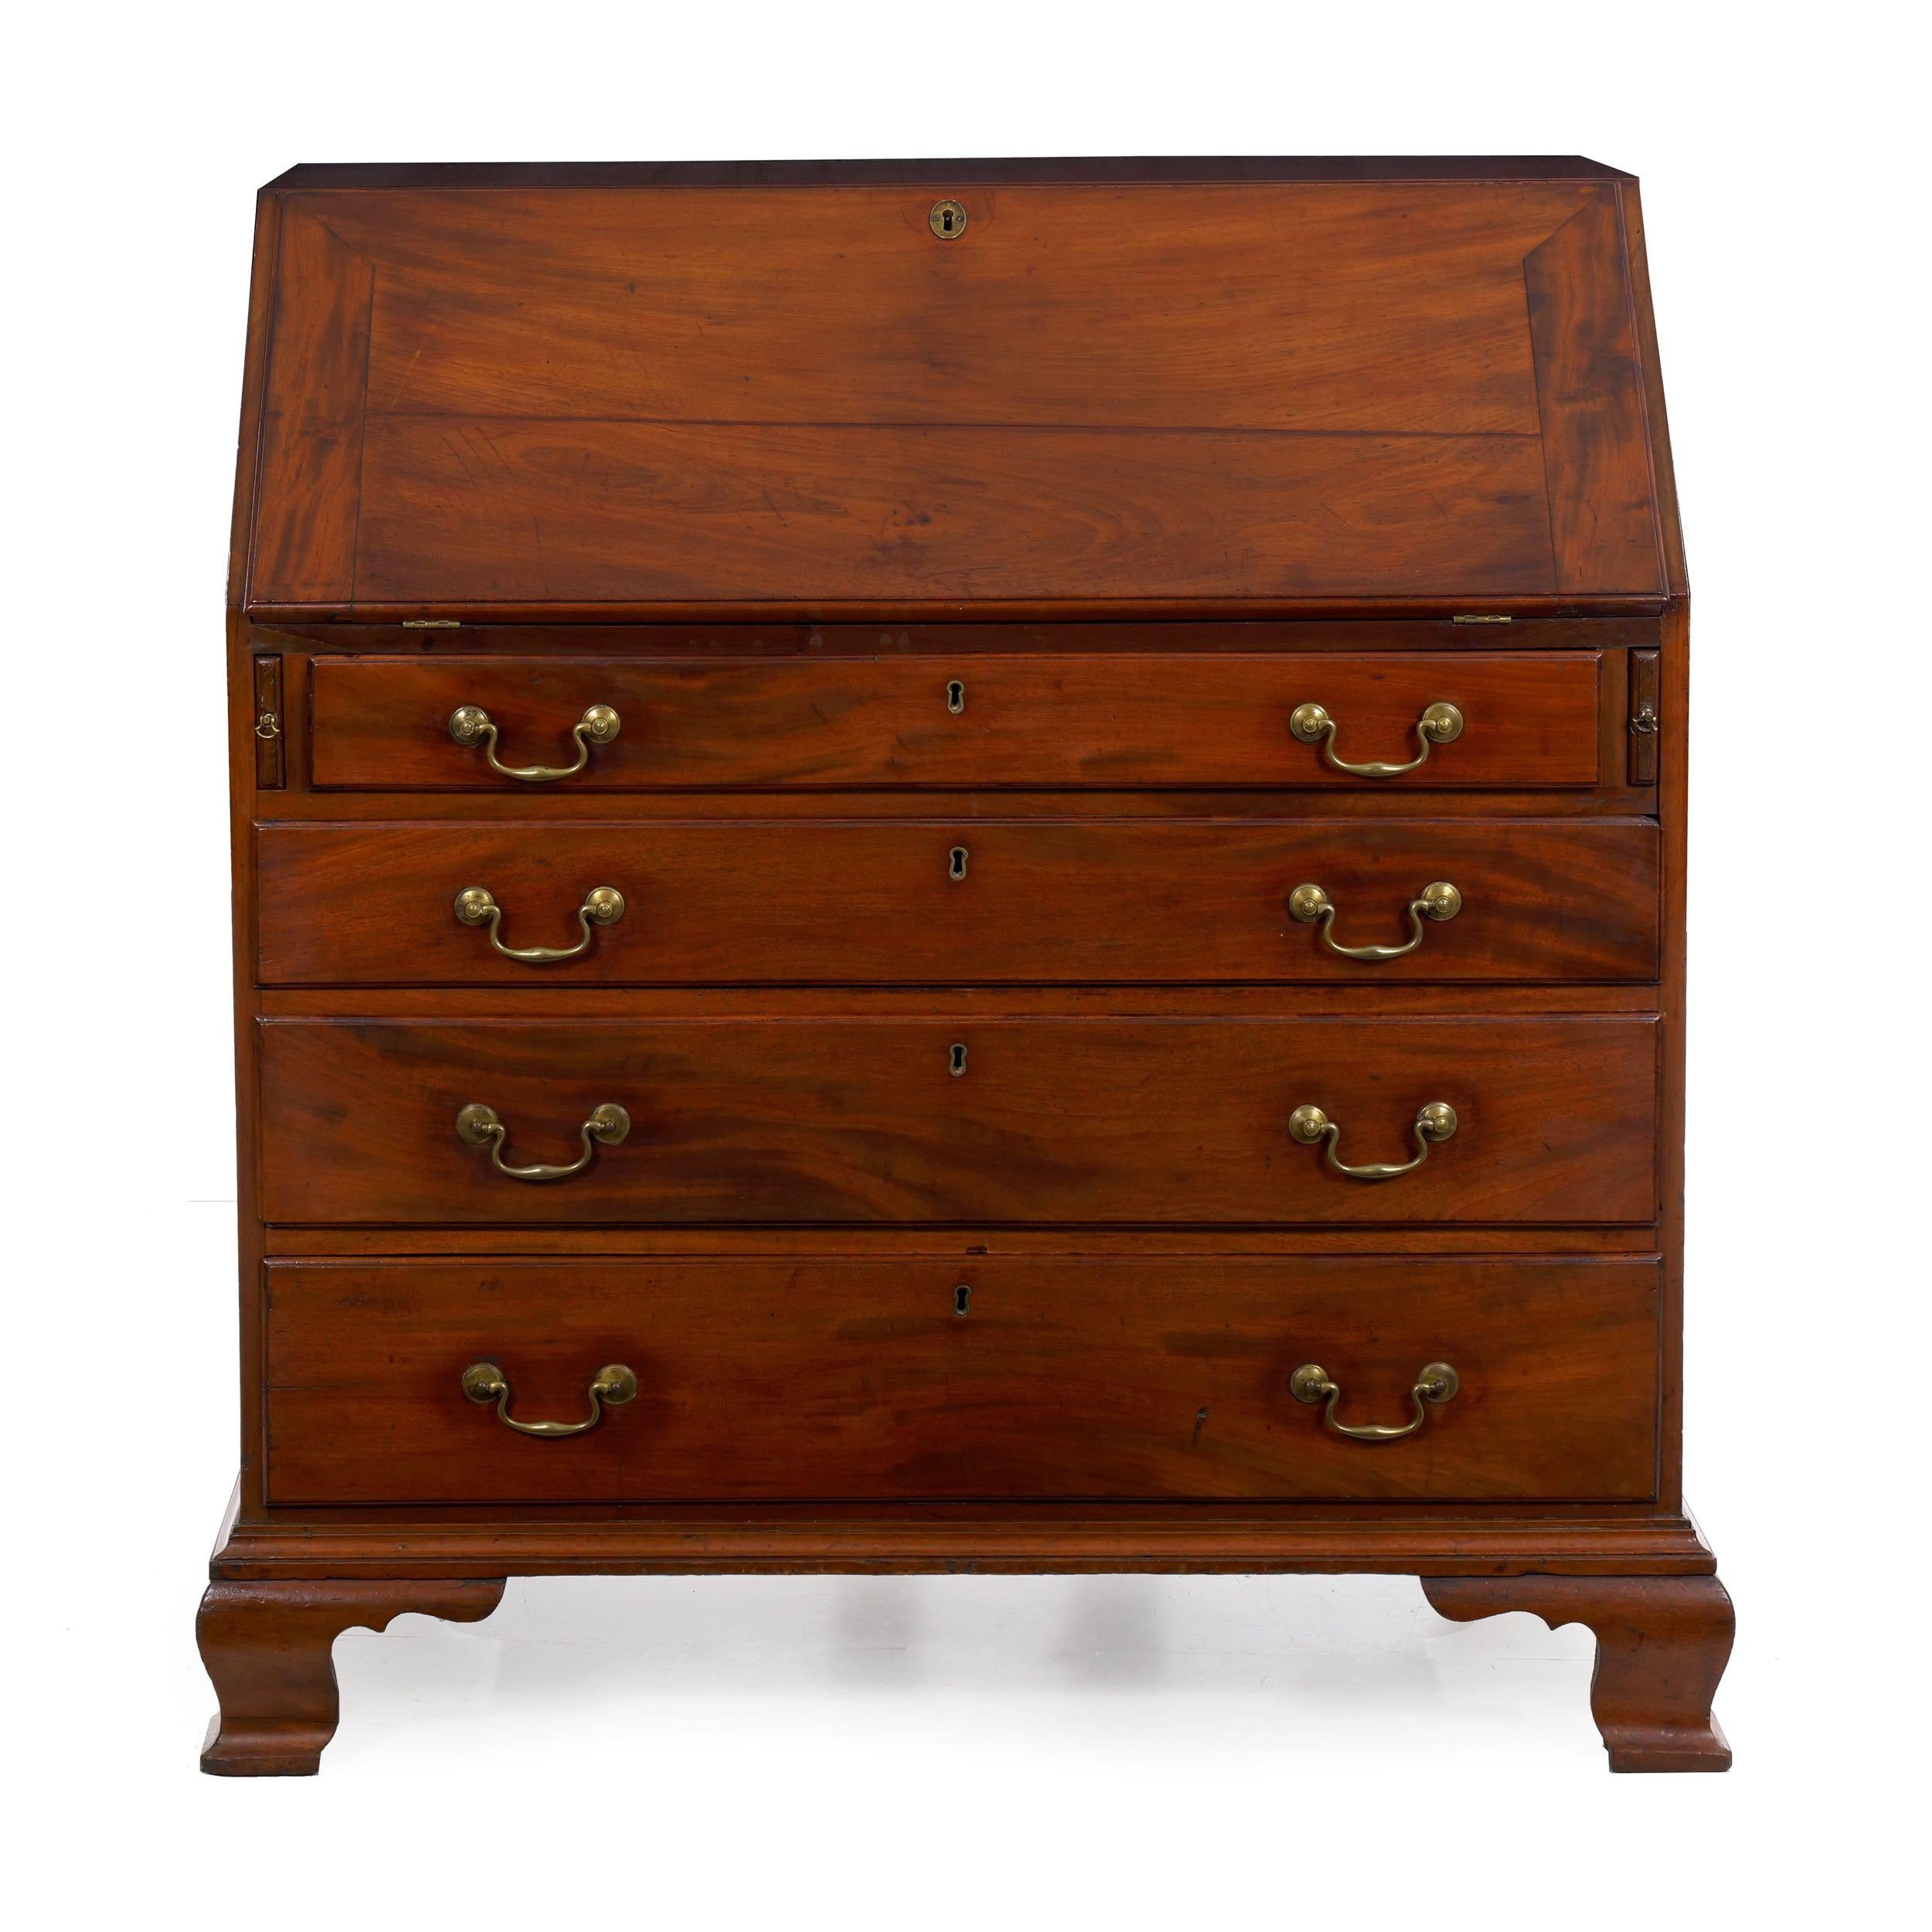 An attractive period slant-front writing desk from the Mid-Atlantic States circa 1790, it is likely a product of Pennsylvania with an overall stoic unembellished form. It was designed strictly as a functional and useful object for managing the home